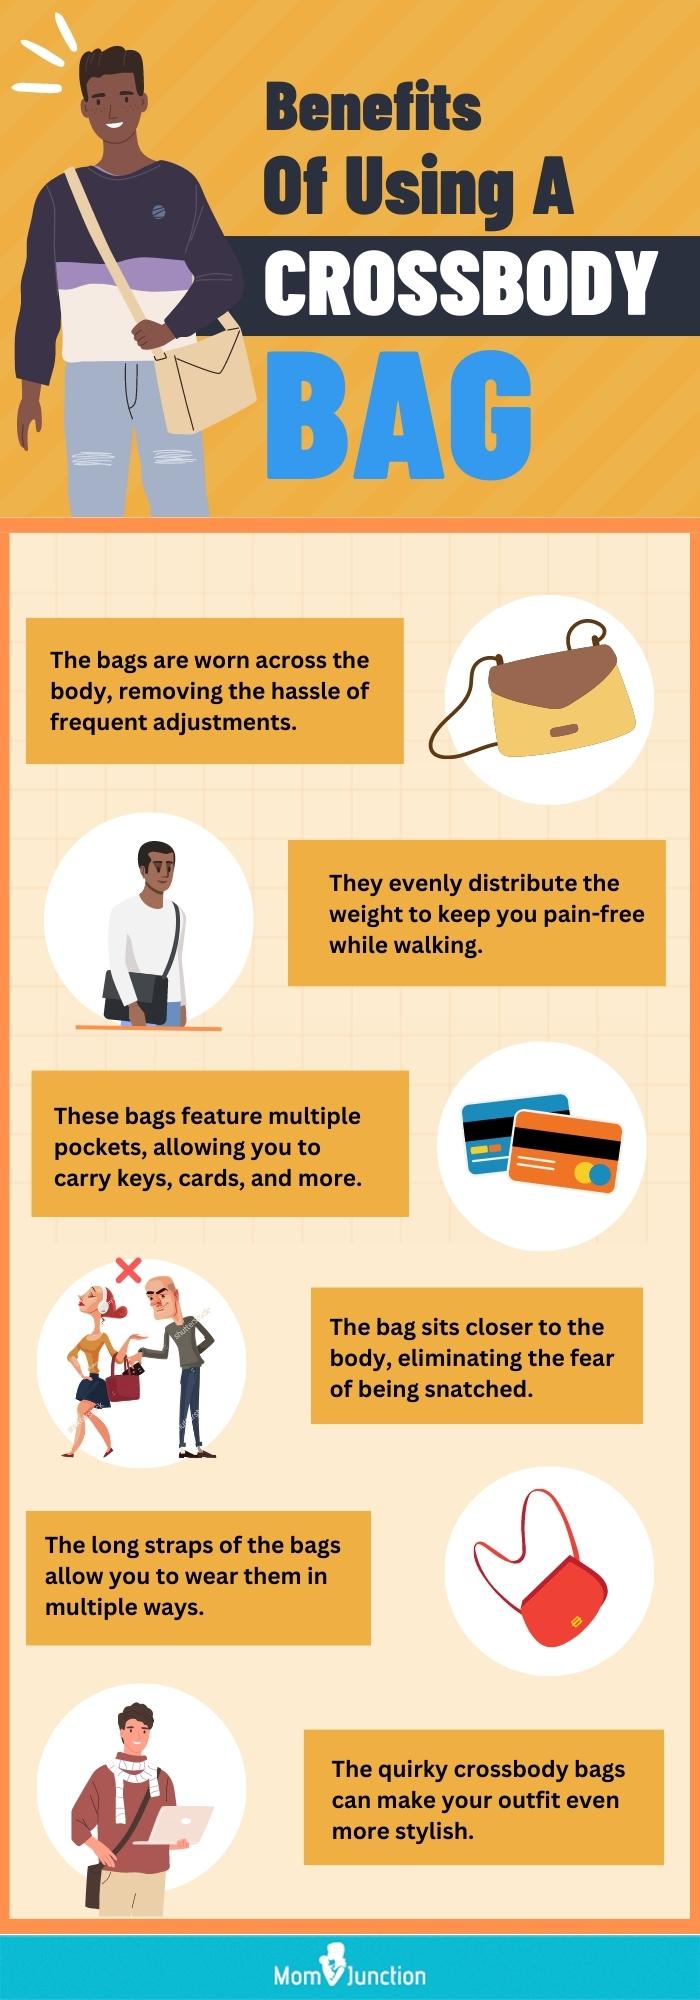 Benefits Of Using A Crossbody Bag (infographic)